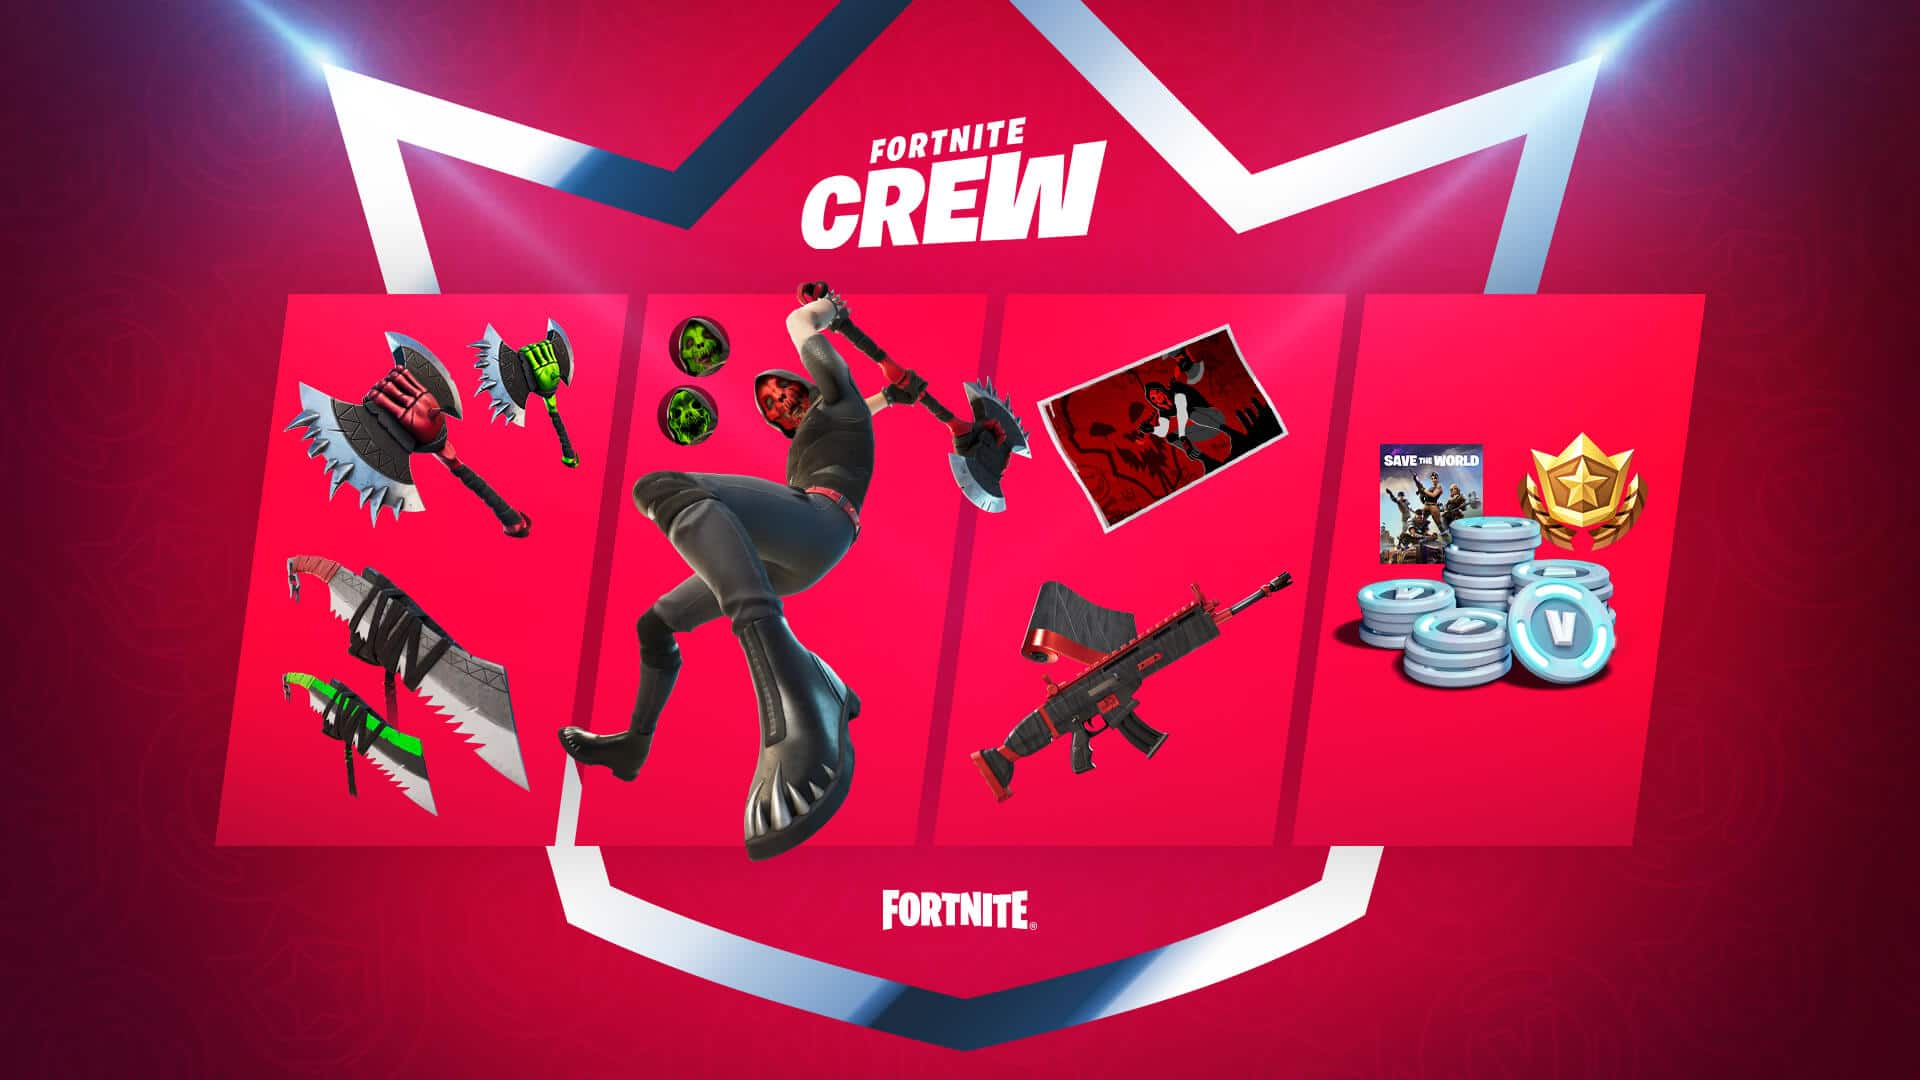 Fortnite Crew May subscription: Deimos outfit and Save the World as a bonus